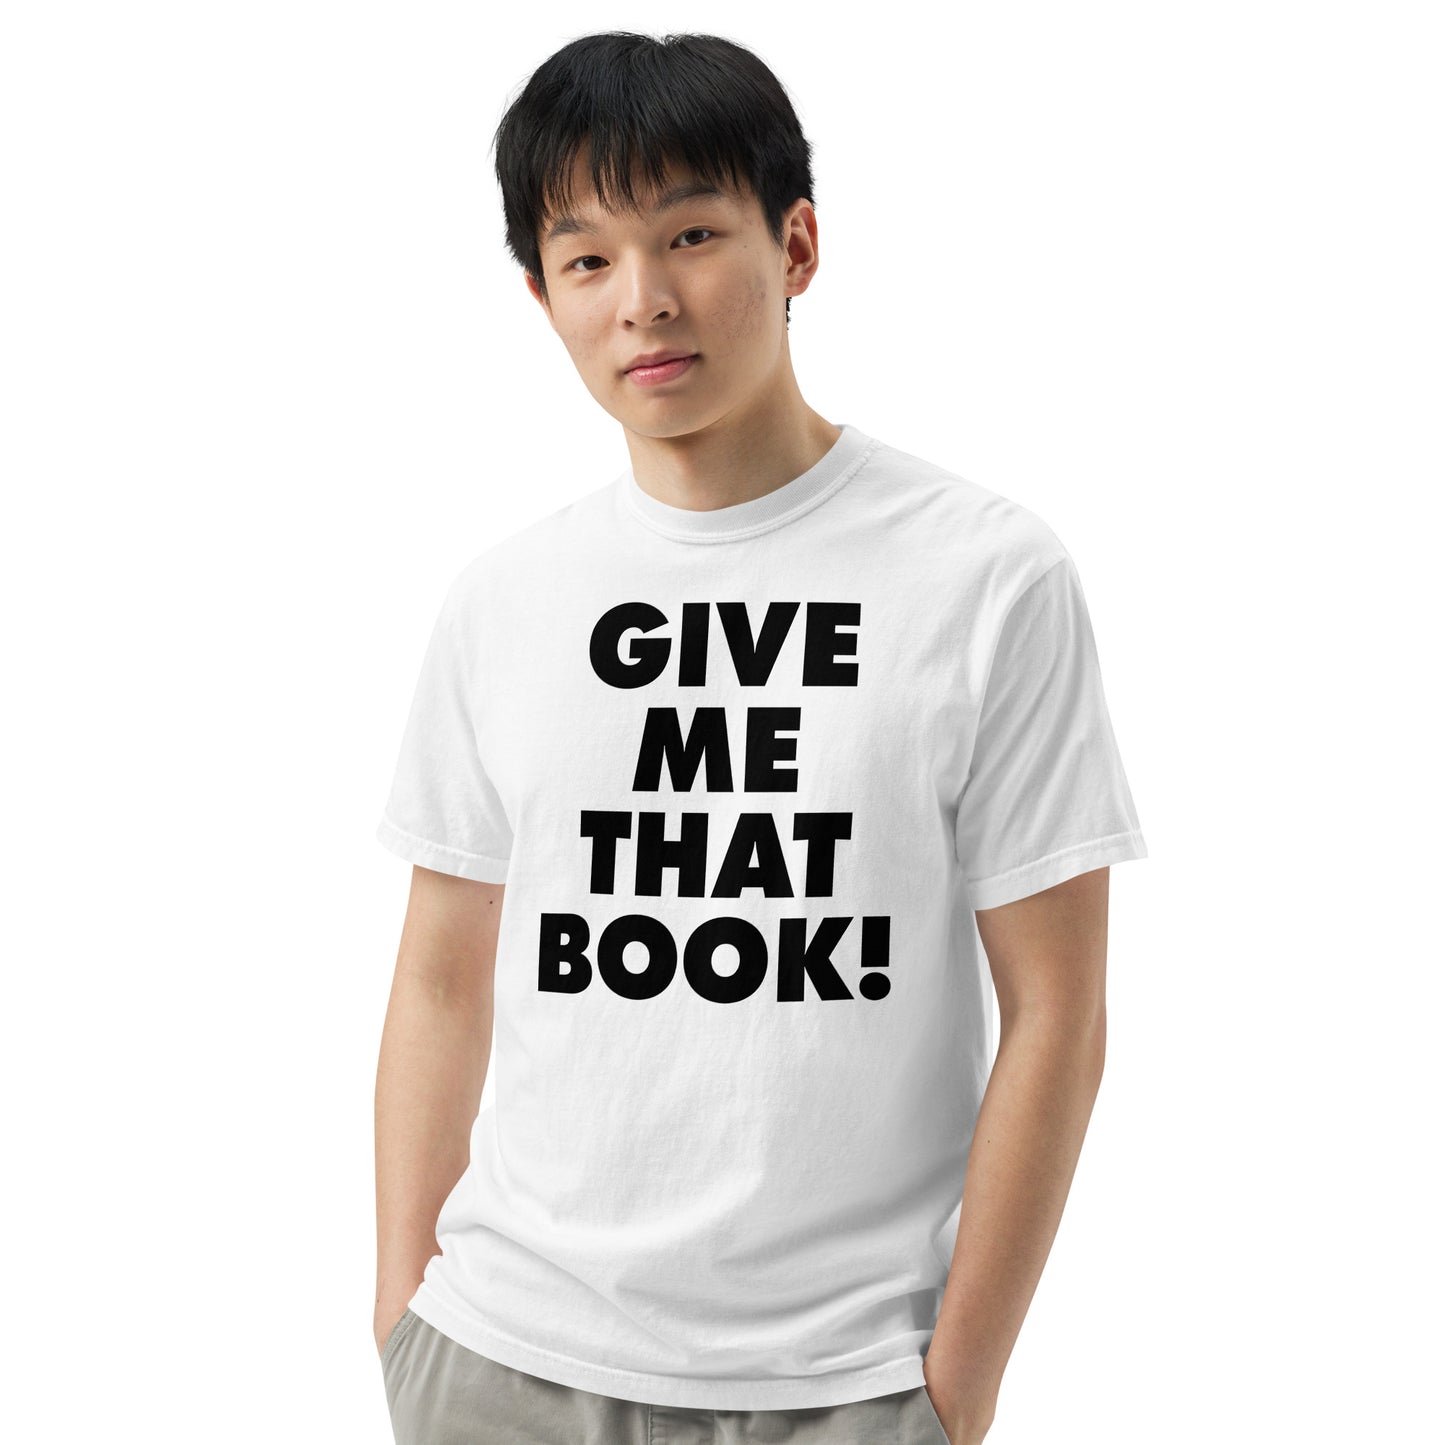 Give Me That Book t-shirt